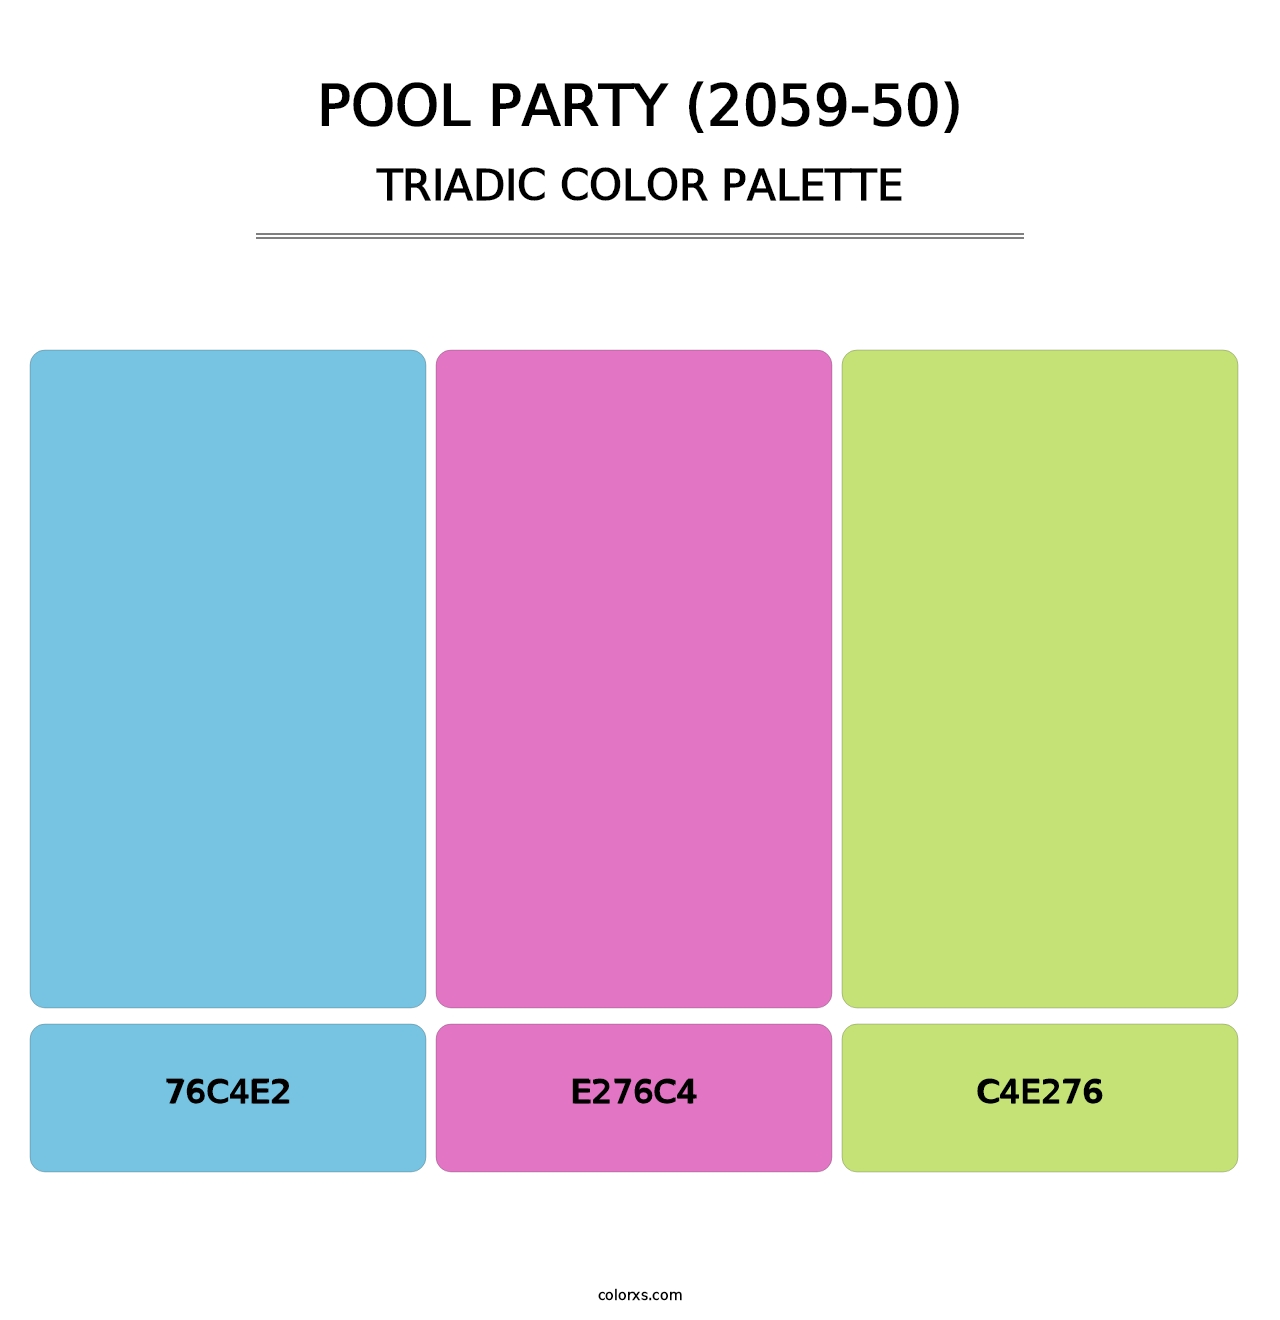 Pool Party (2059-50) - Triadic Color Palette